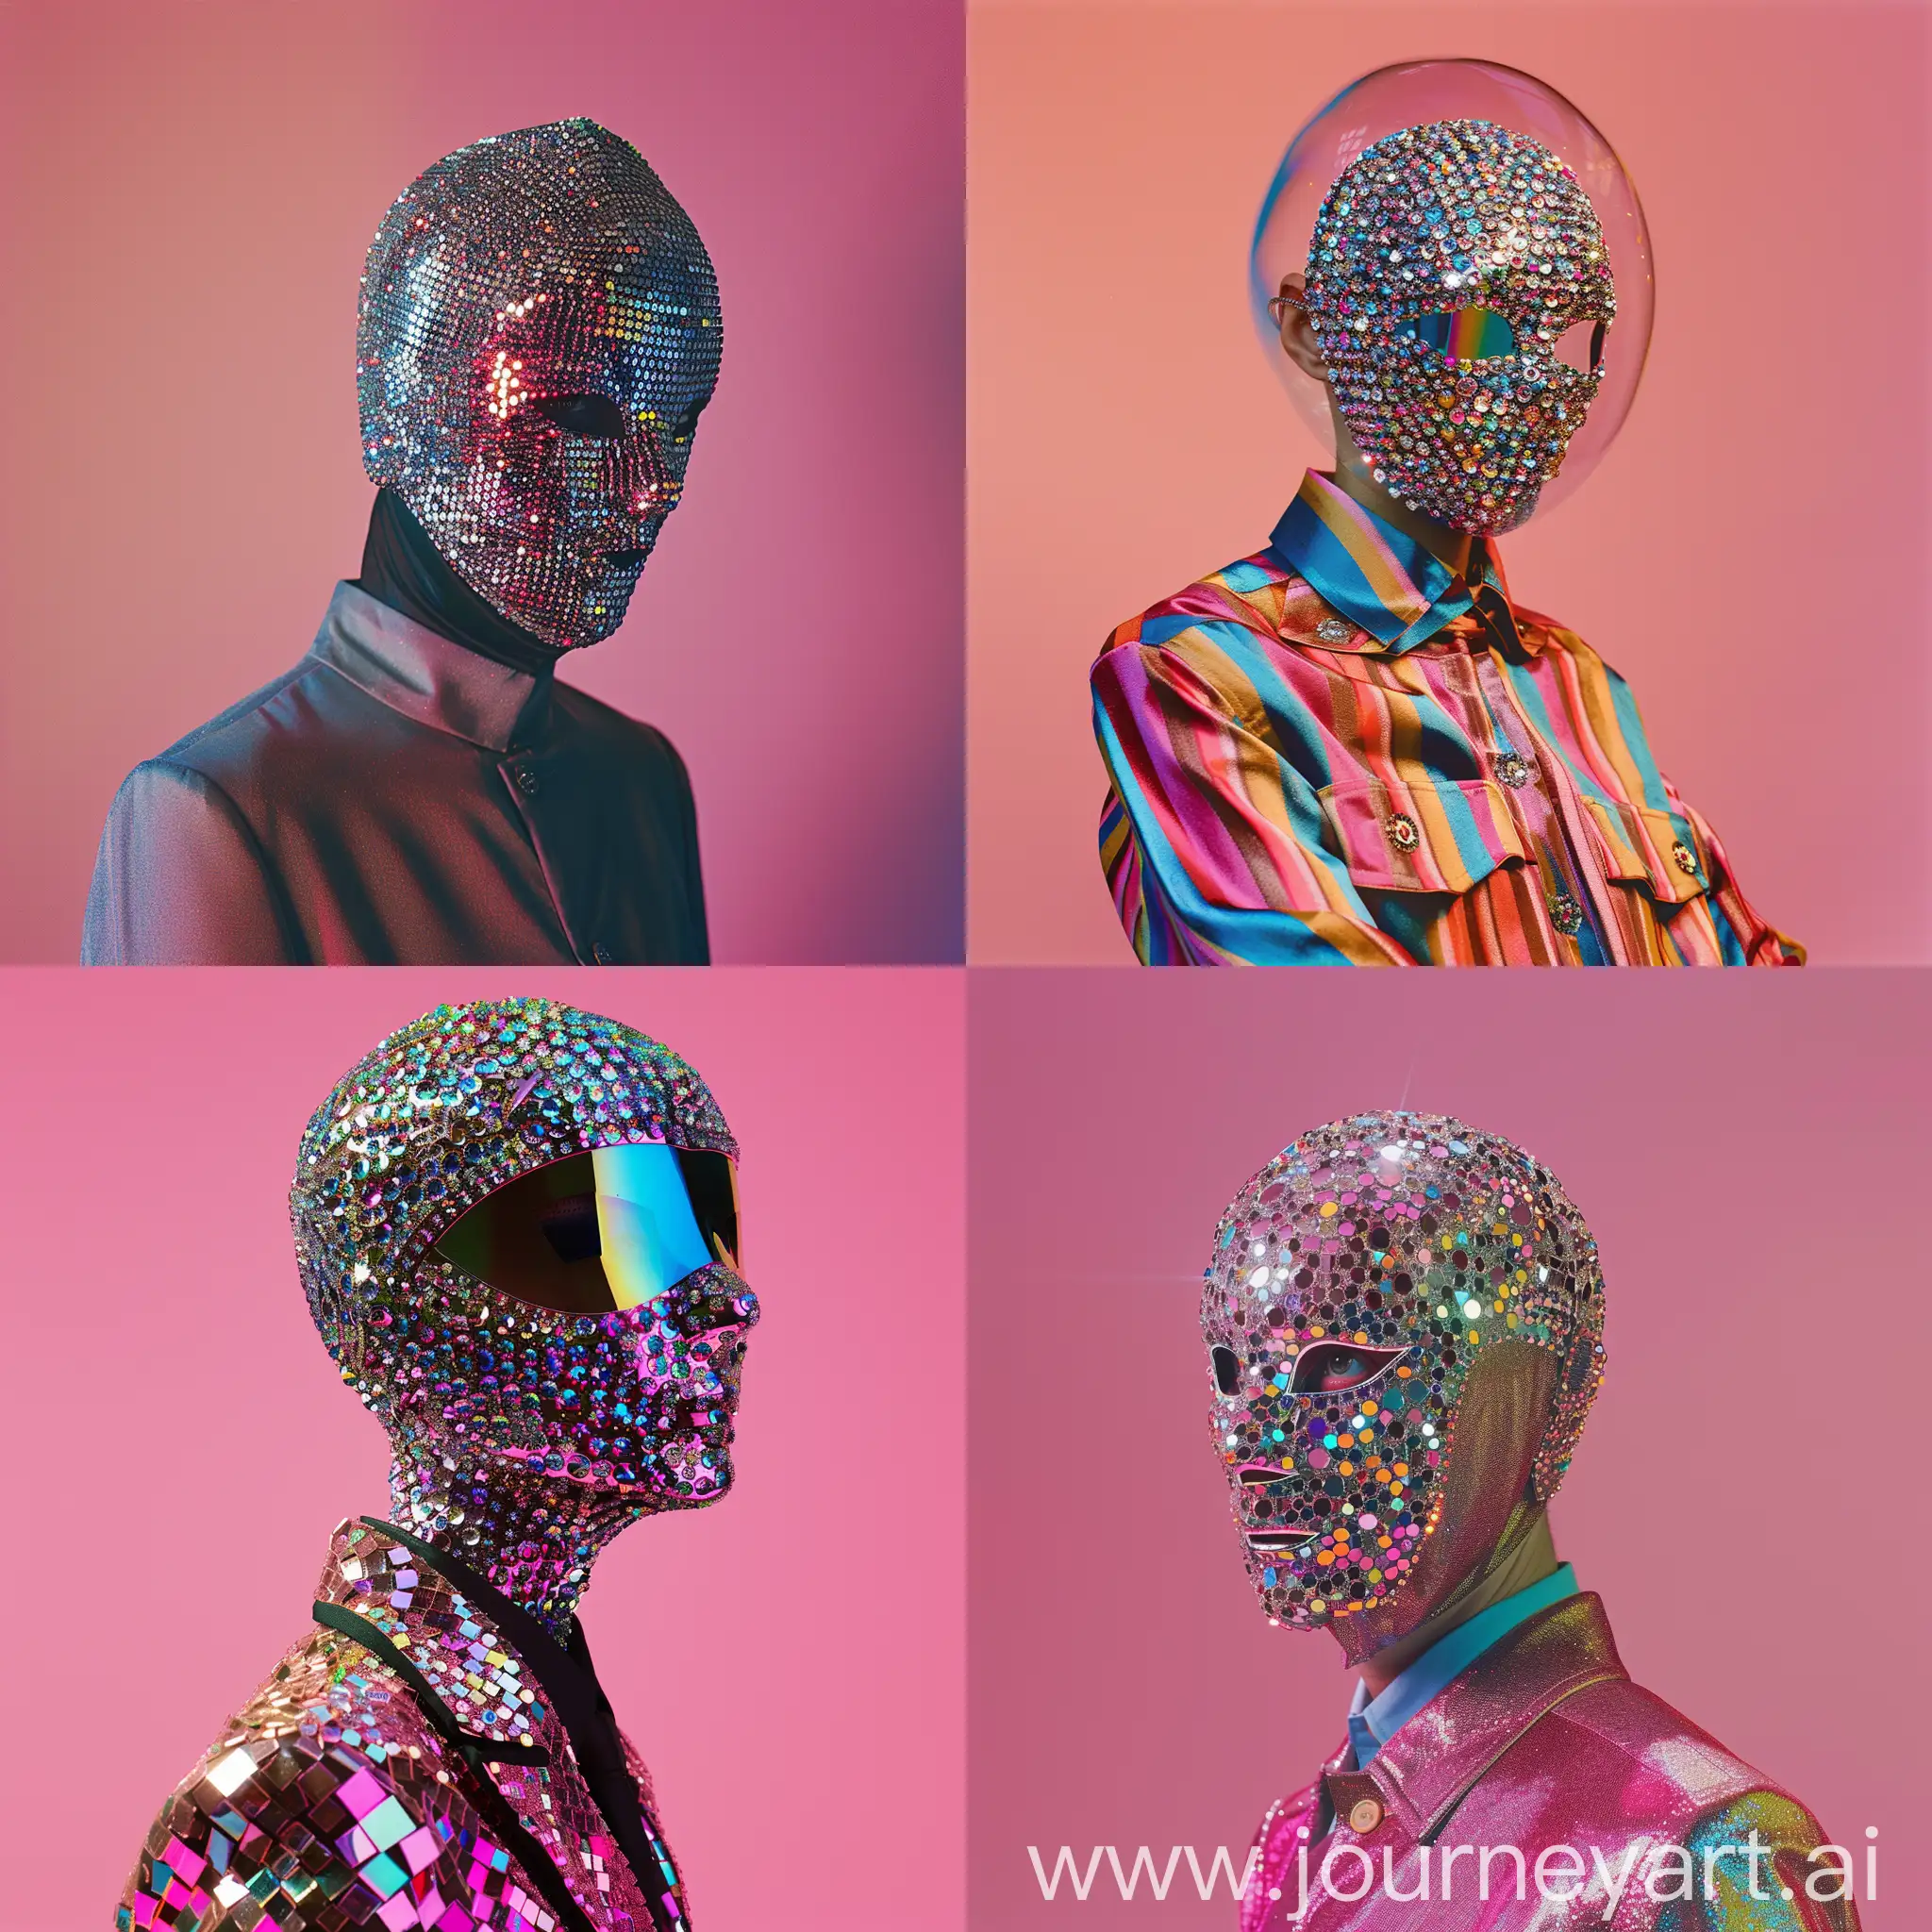 Fashionable-Person-in-Swarovski-Crystal-Mask-Against-Solid-Background